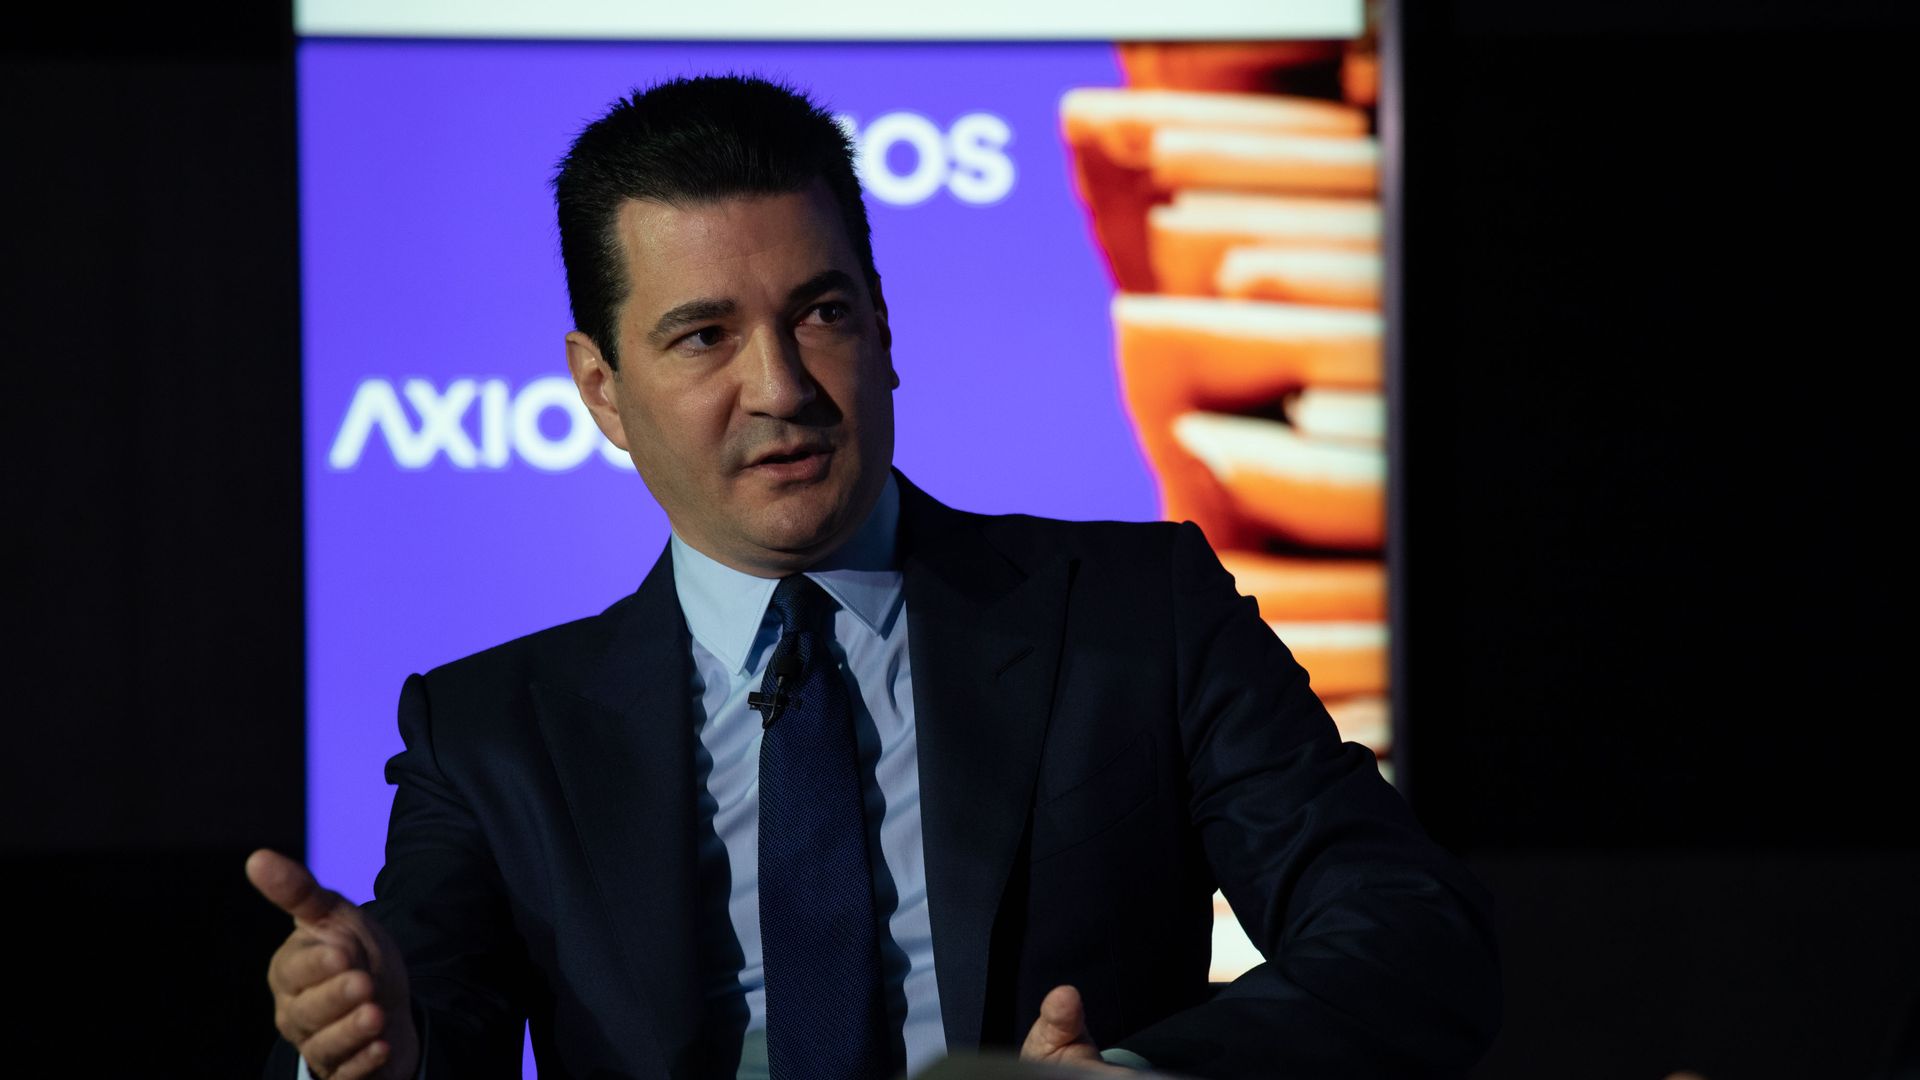 FDA Commissioner Scott Gottlieb speaks at an Axios event on vaping